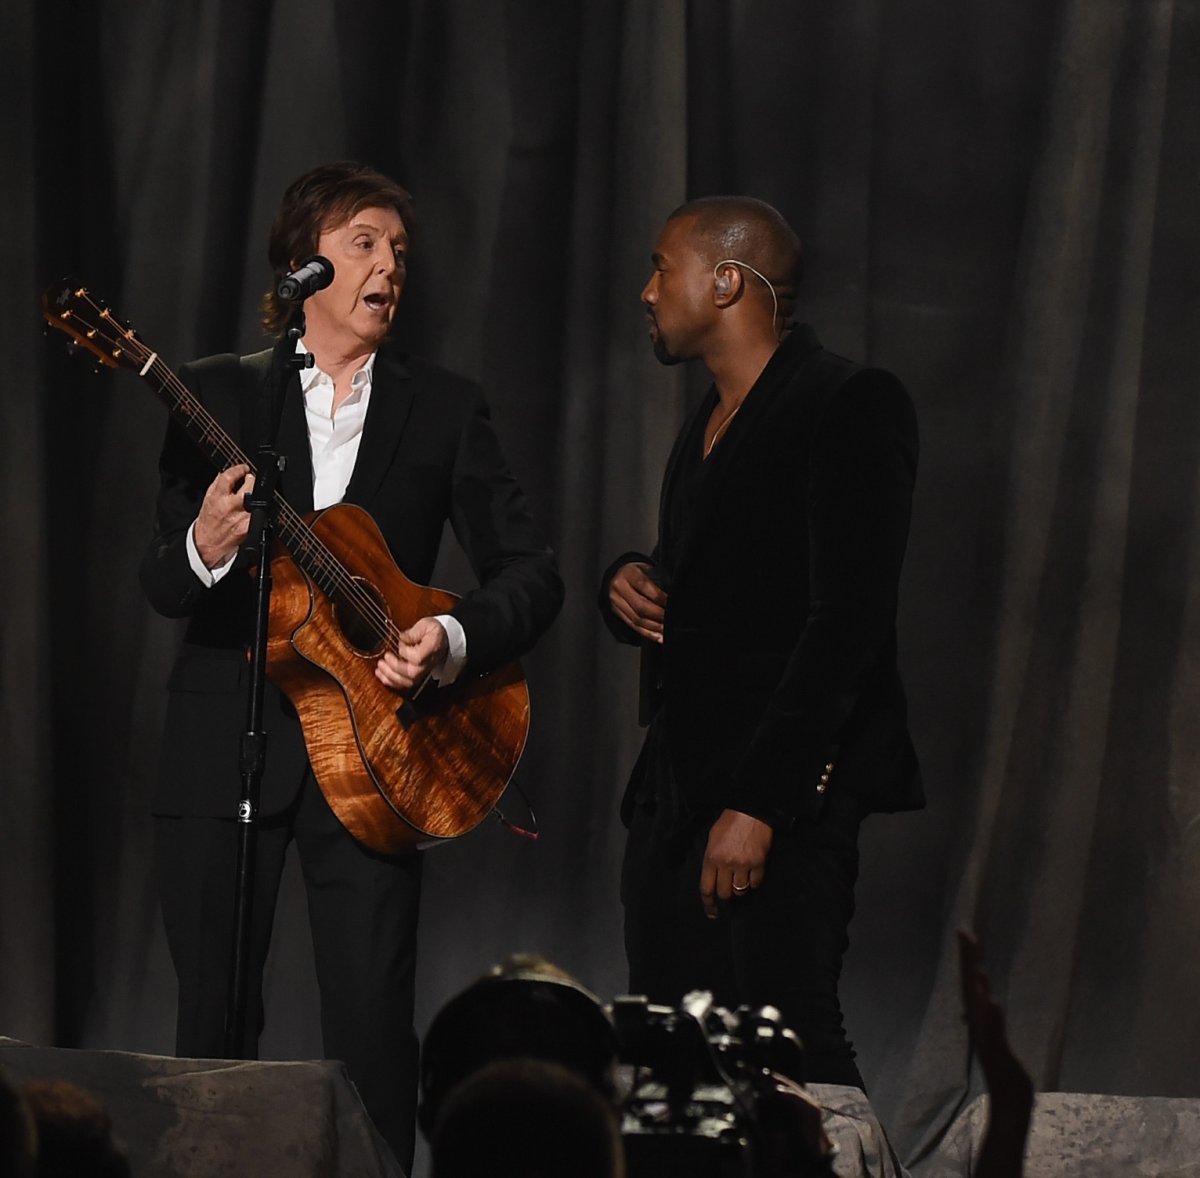 Musicians Paul McCartney, Rihanna and Kanye West perform onstage during The 57th Annual GRAMMY Awards at the STAPLES Center on February 8, 2015 in Los Angeles, California. 